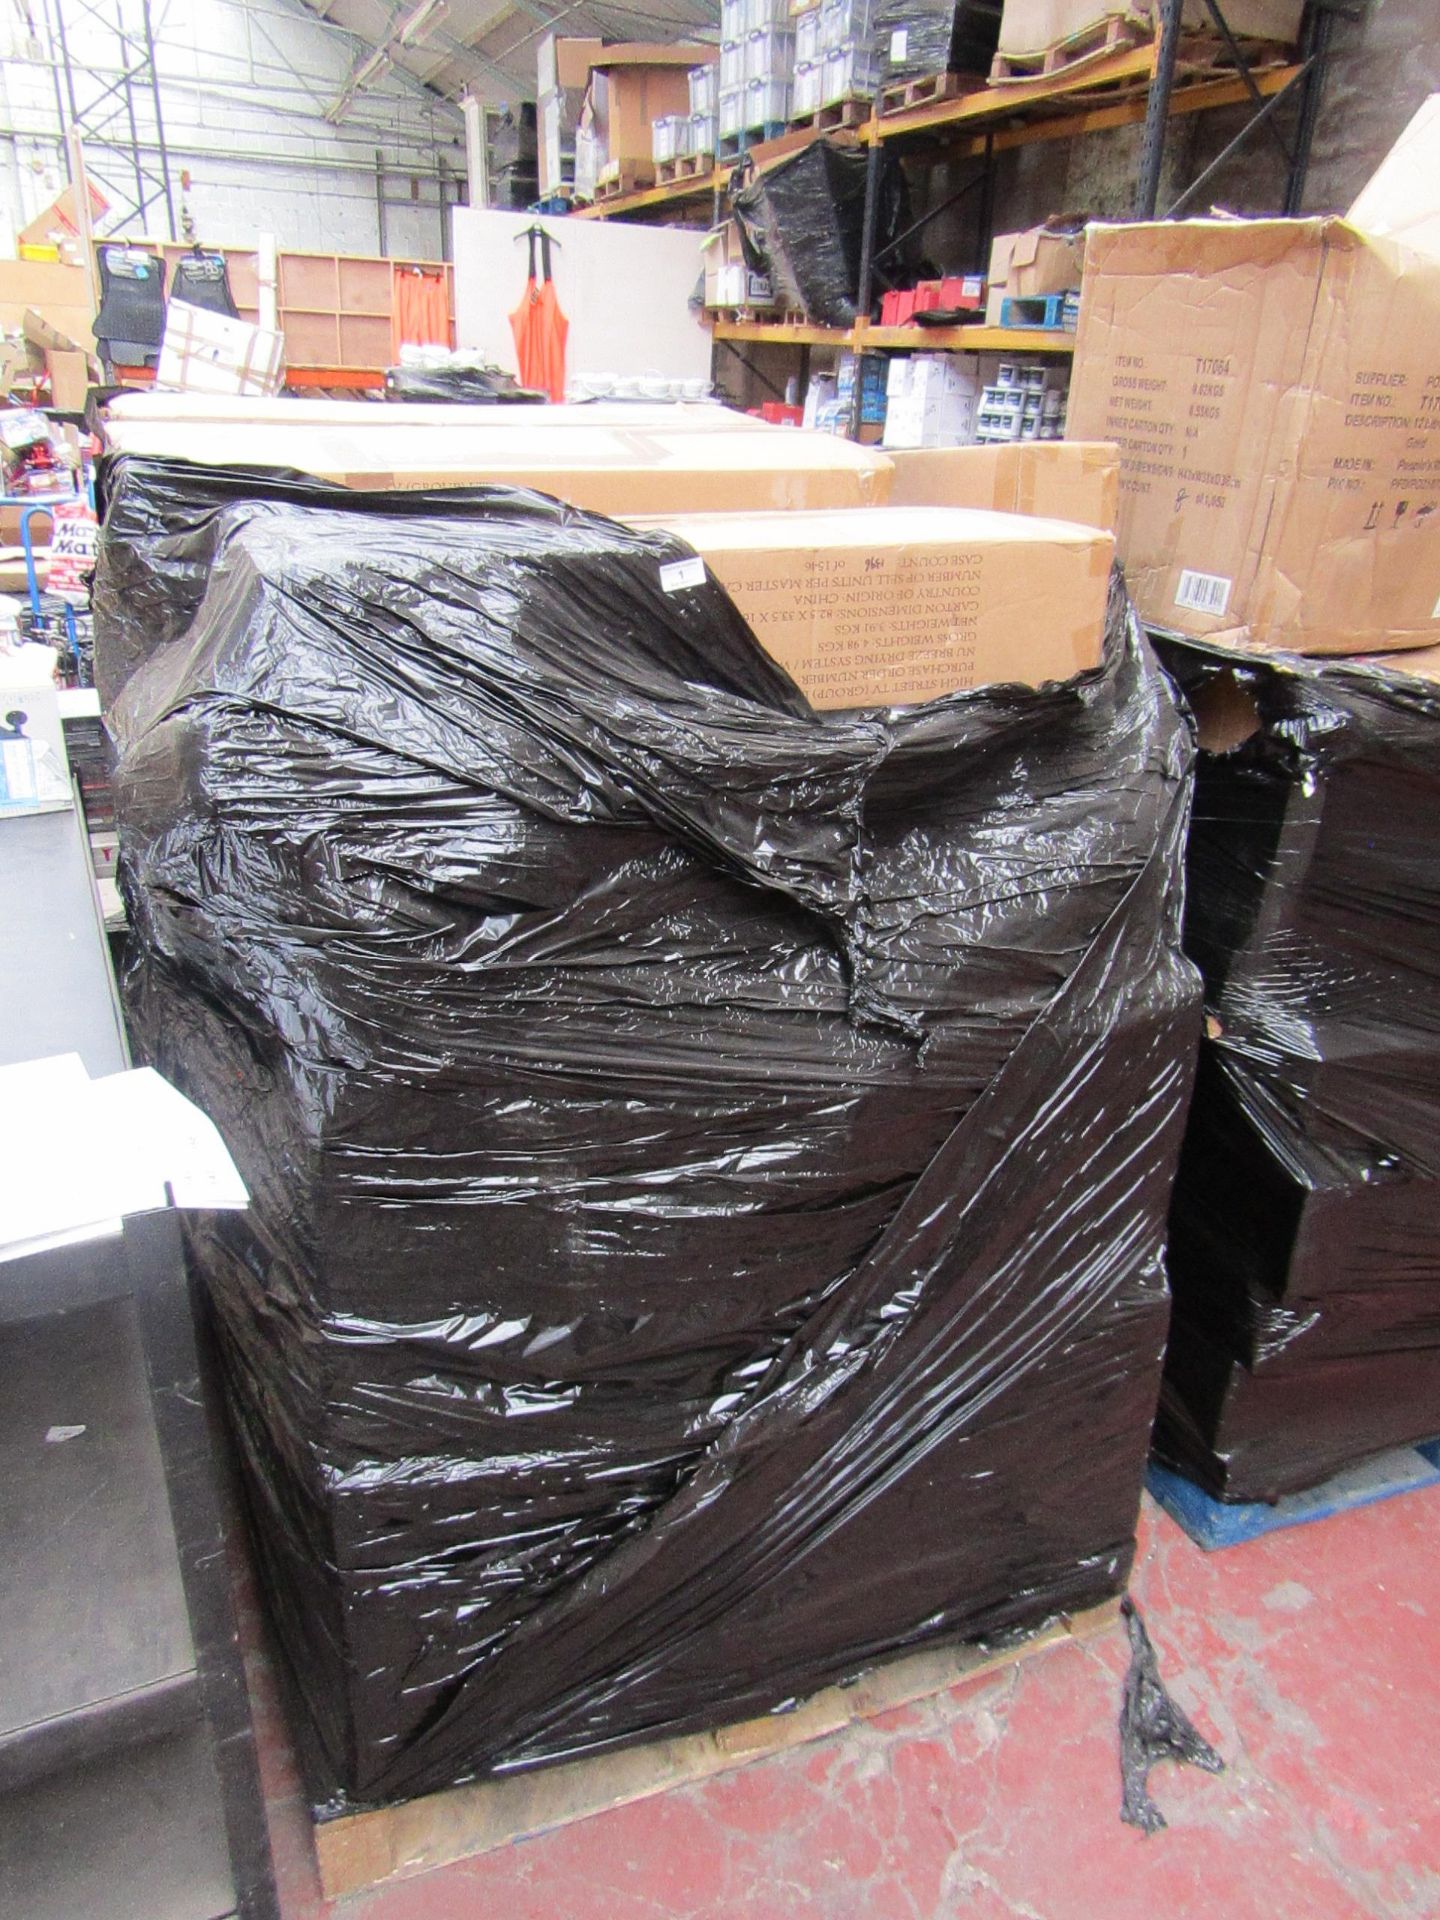 | 1X | PALLET OF RAW CUSTOMER ELECTRICAL RETURNS FROMA LARGE ONLINE RETAILER | UNCHECKED RETURNS |